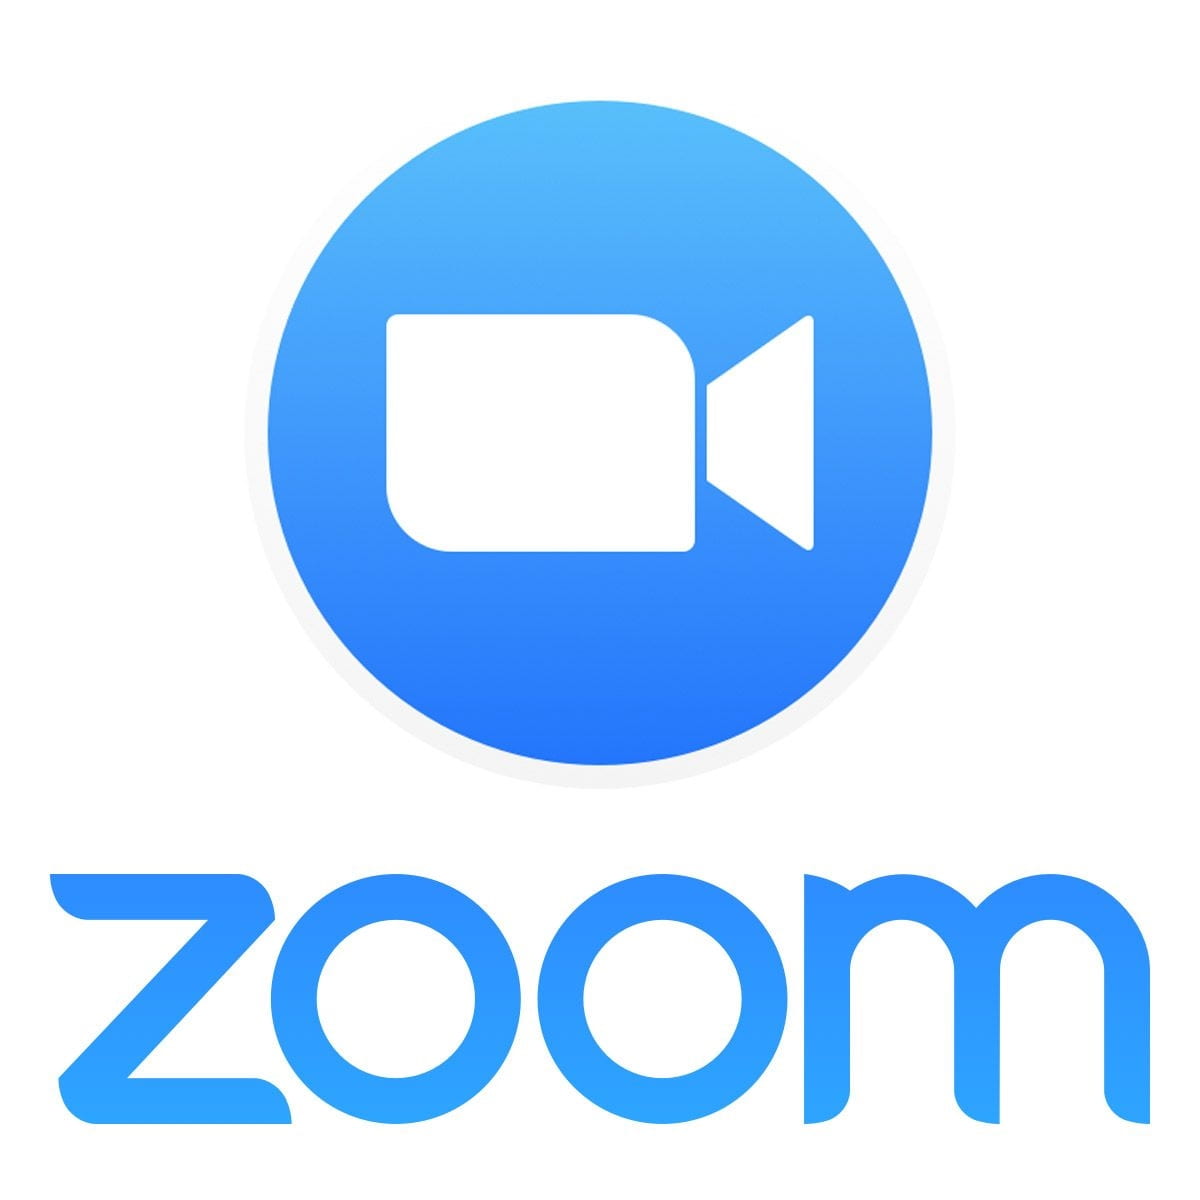 This 39 Facts About Zoom App Logo Image Zoom Is A Program That Is 